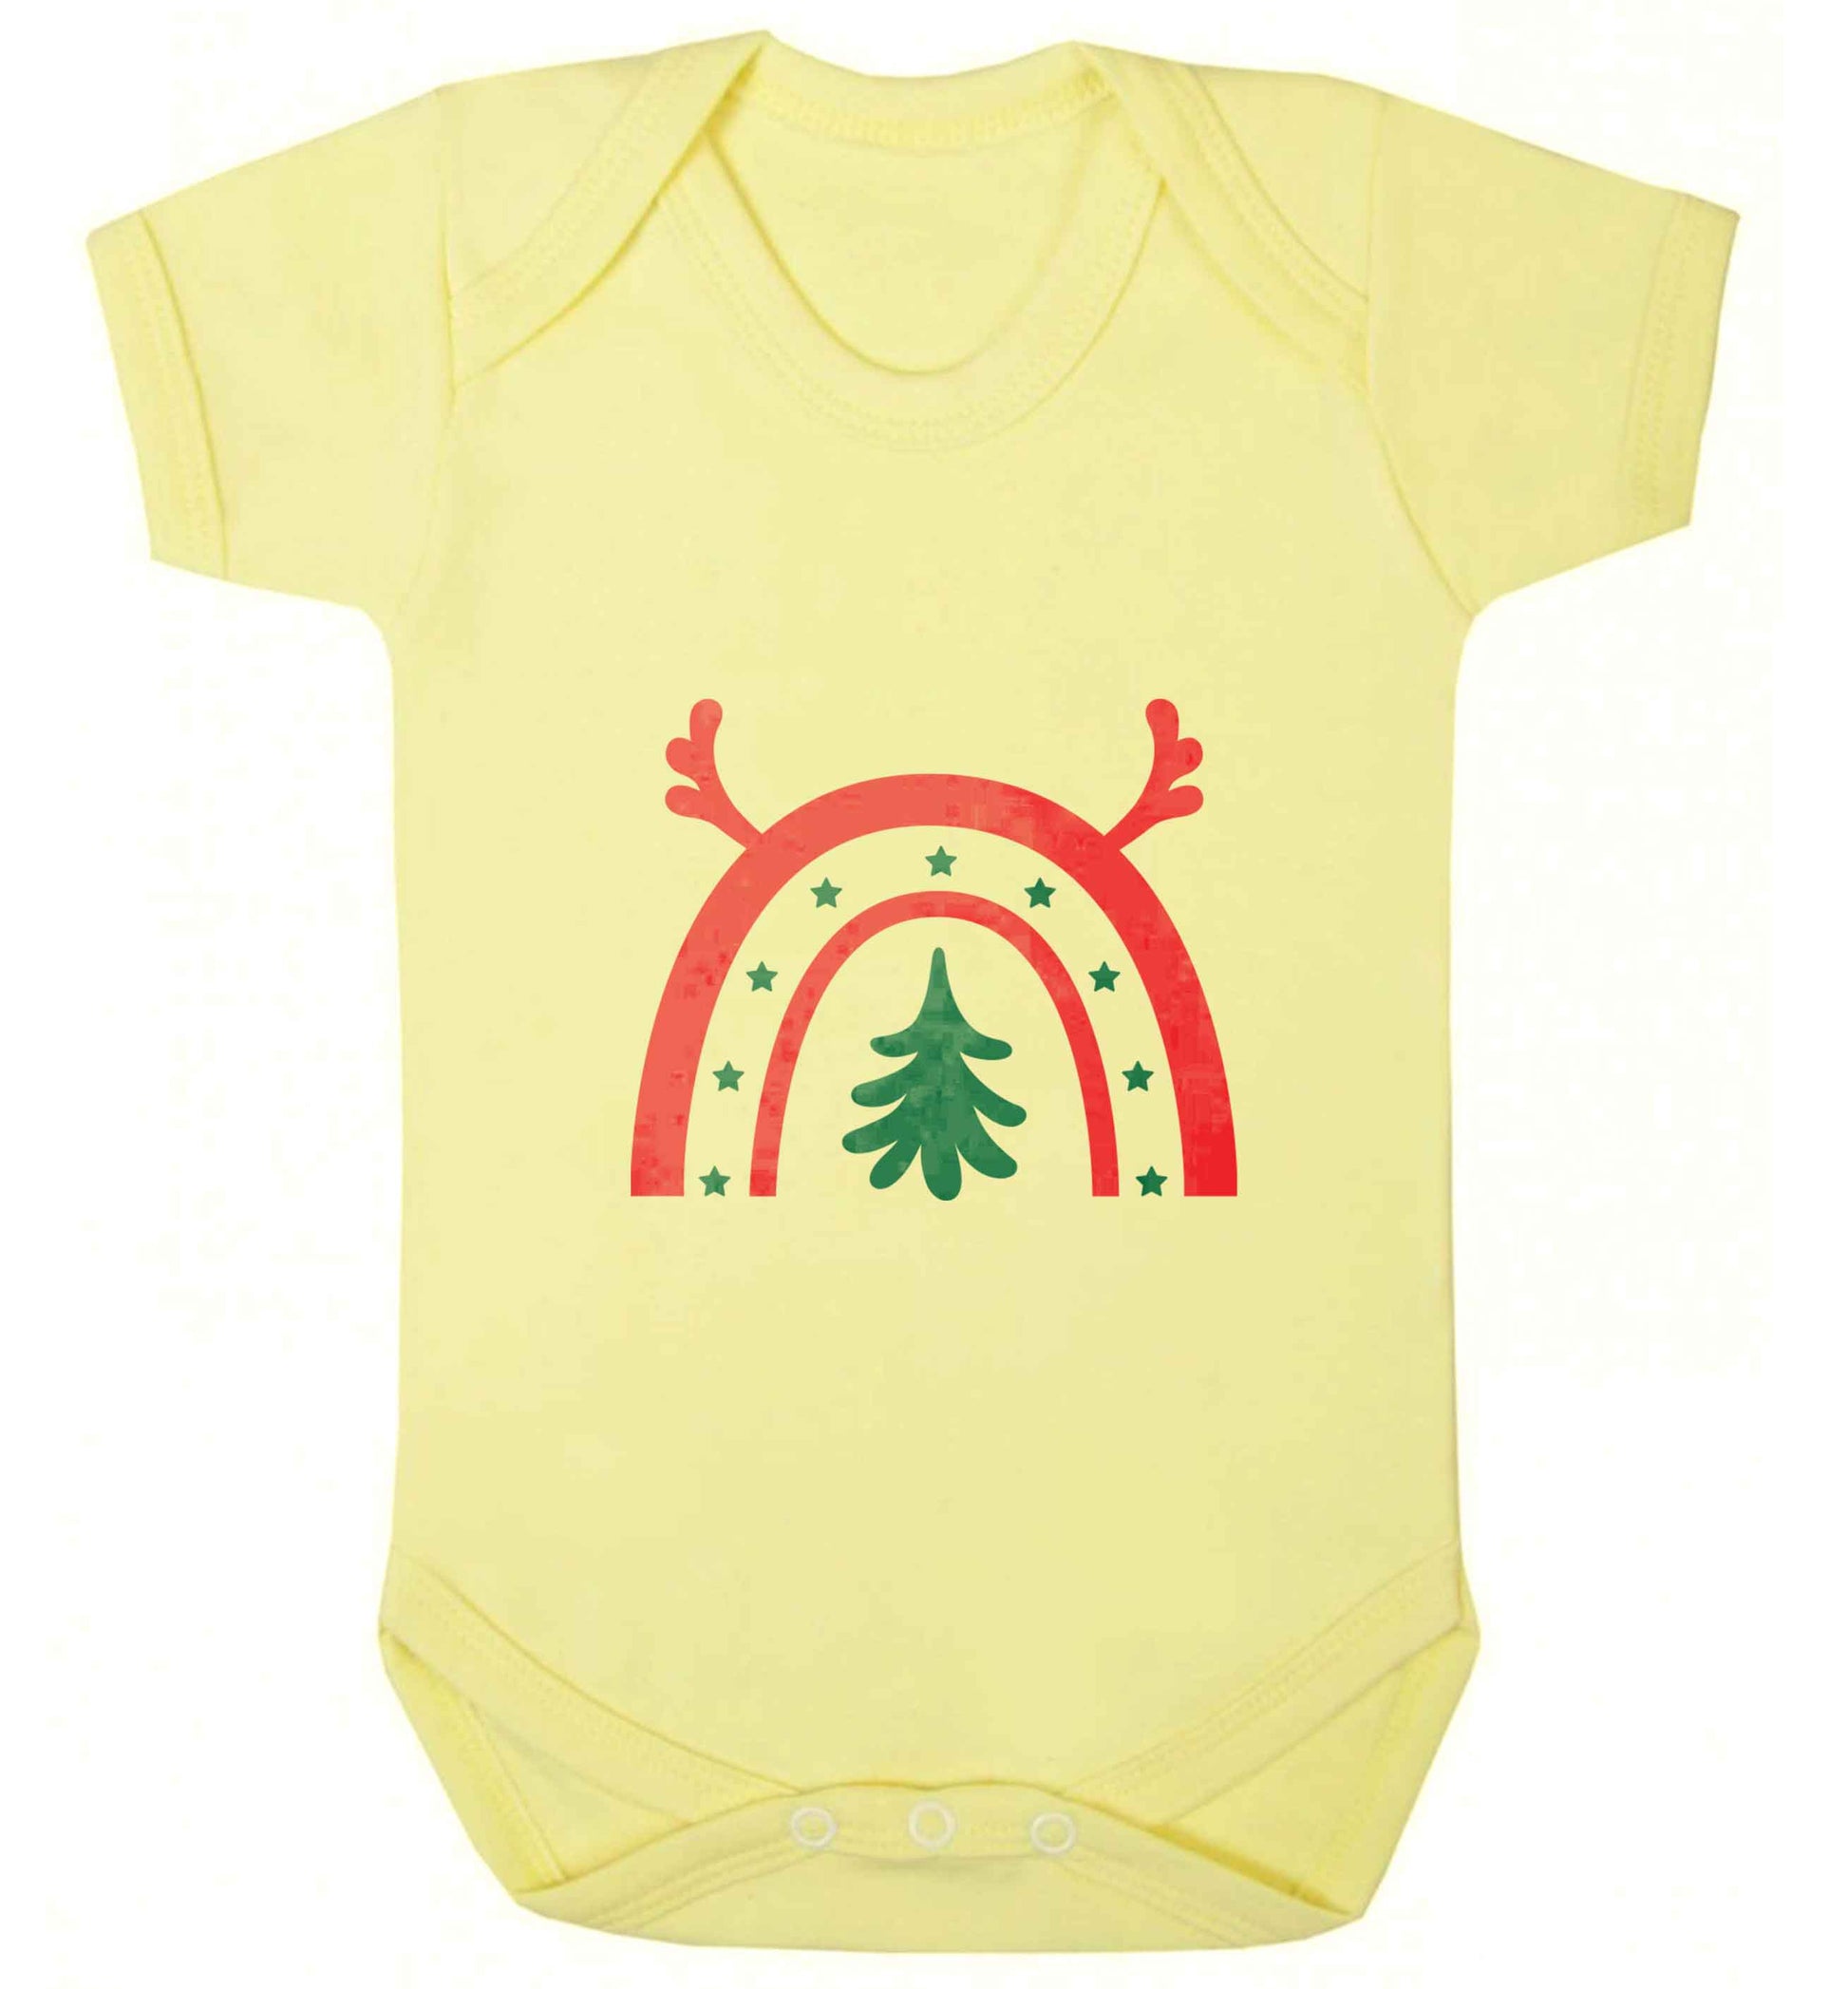 Christmas rainbow baby vest pale yellow 18-24 months